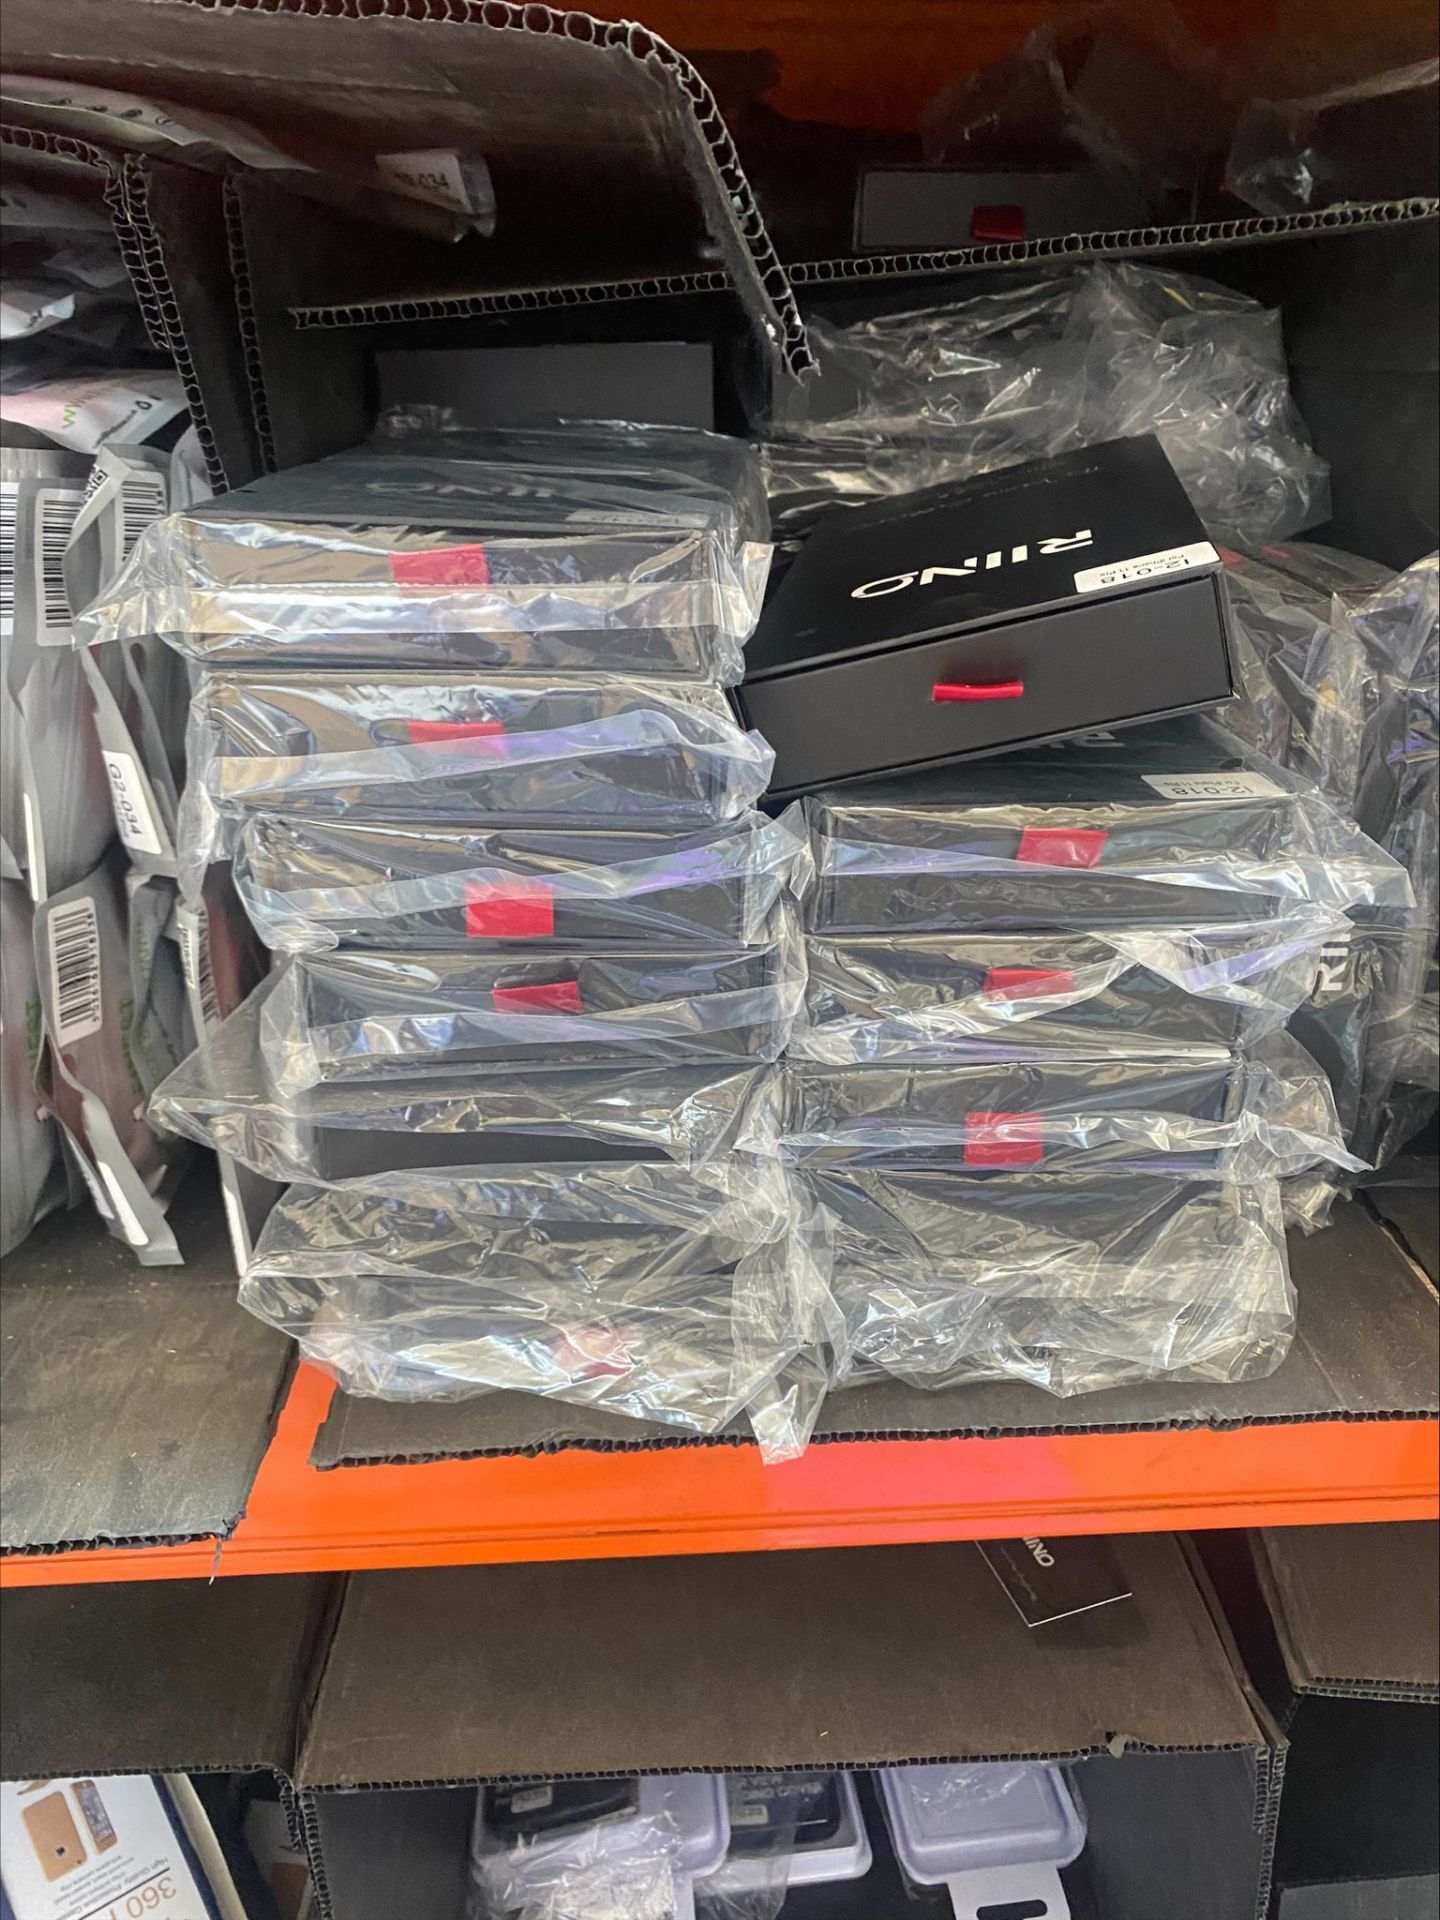 Joblot 5K Units iPhone, Samsung, Airpod, Apple Watch, Charging Cables, Phone Covers Accessories - Image 10 of 20